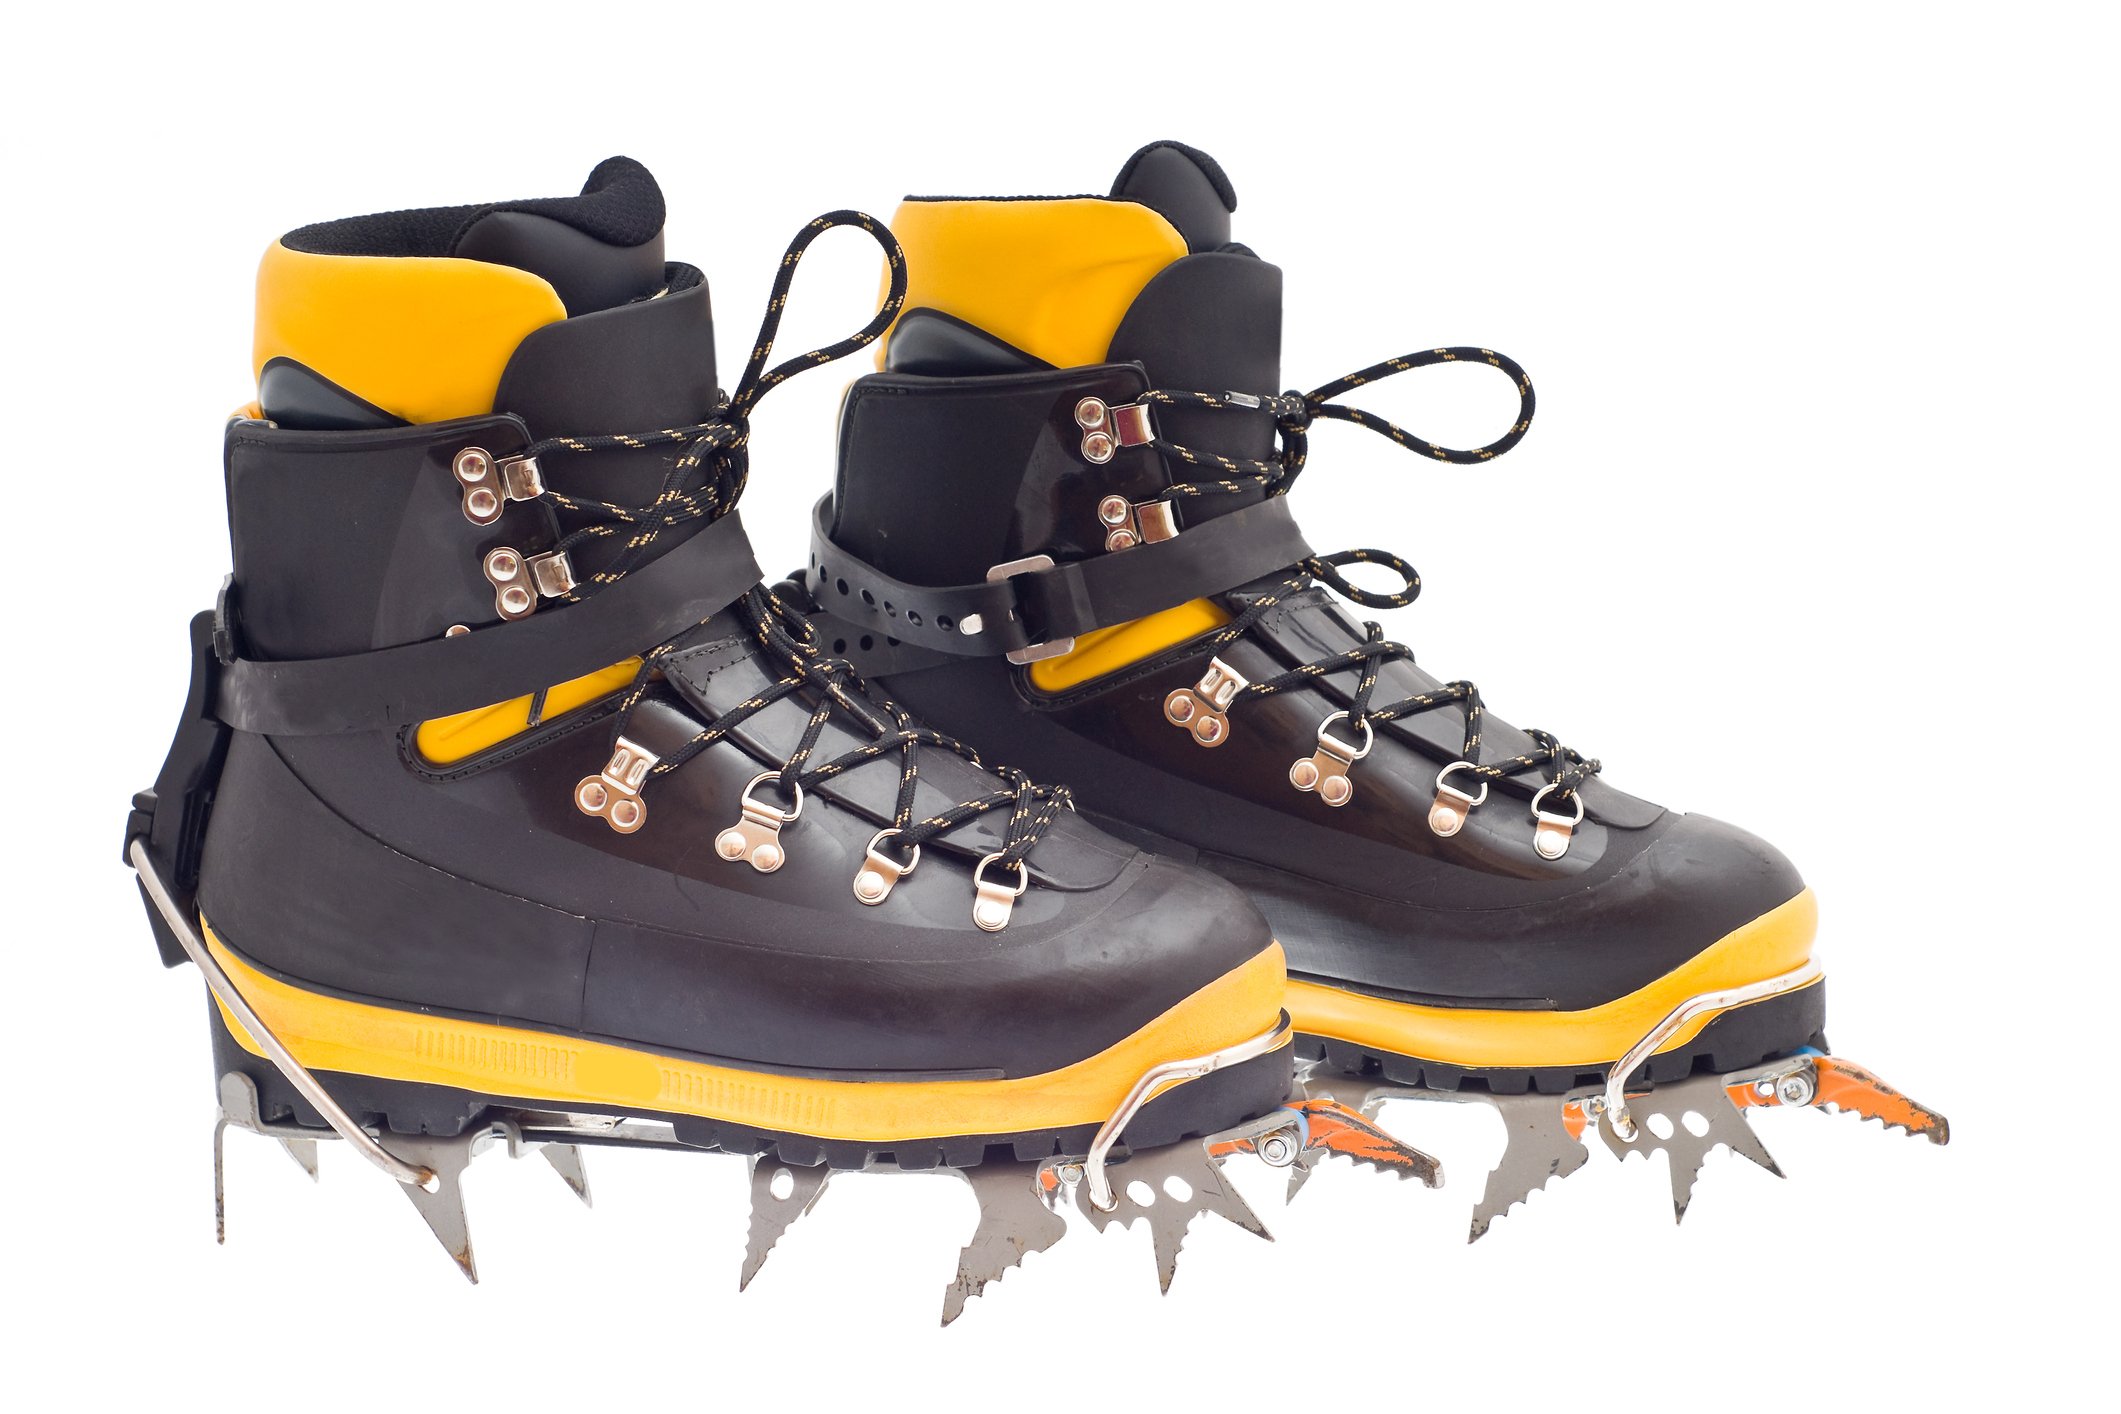 A pair of B3 hiking boots with C3 crampons